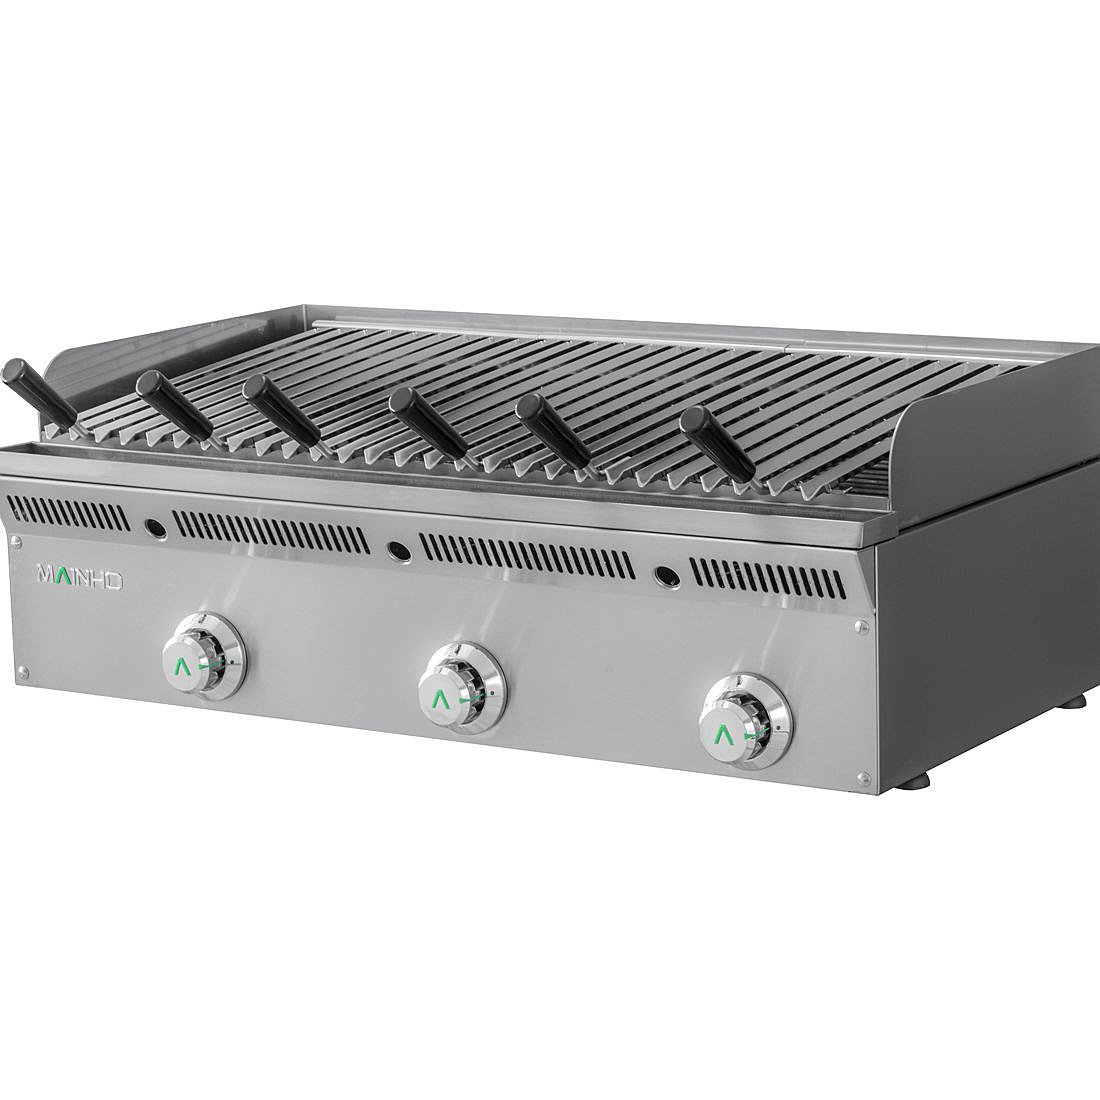 Grill ELB I-93GN Eco-Line Barbecue MAINHO M04- ELB I93GN MAINHO® ECO -LINE Range for Compact Kitchen or Food-Truck